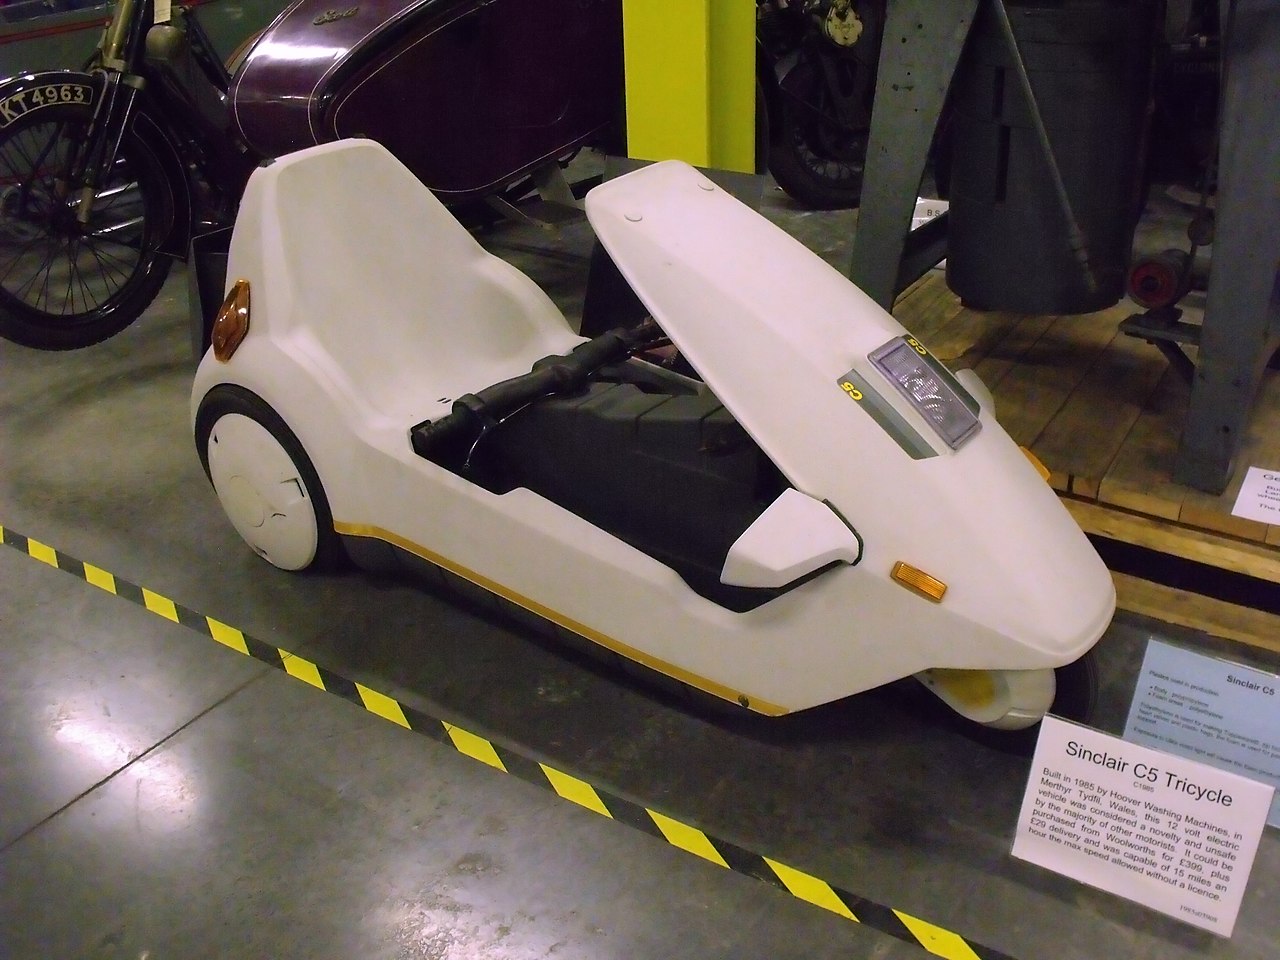 File:Museum Collections Centre - 25 Dollman Street - Garage - Sinclair C5  Tricycle (7279692598).jpg - Wikimedia Commons